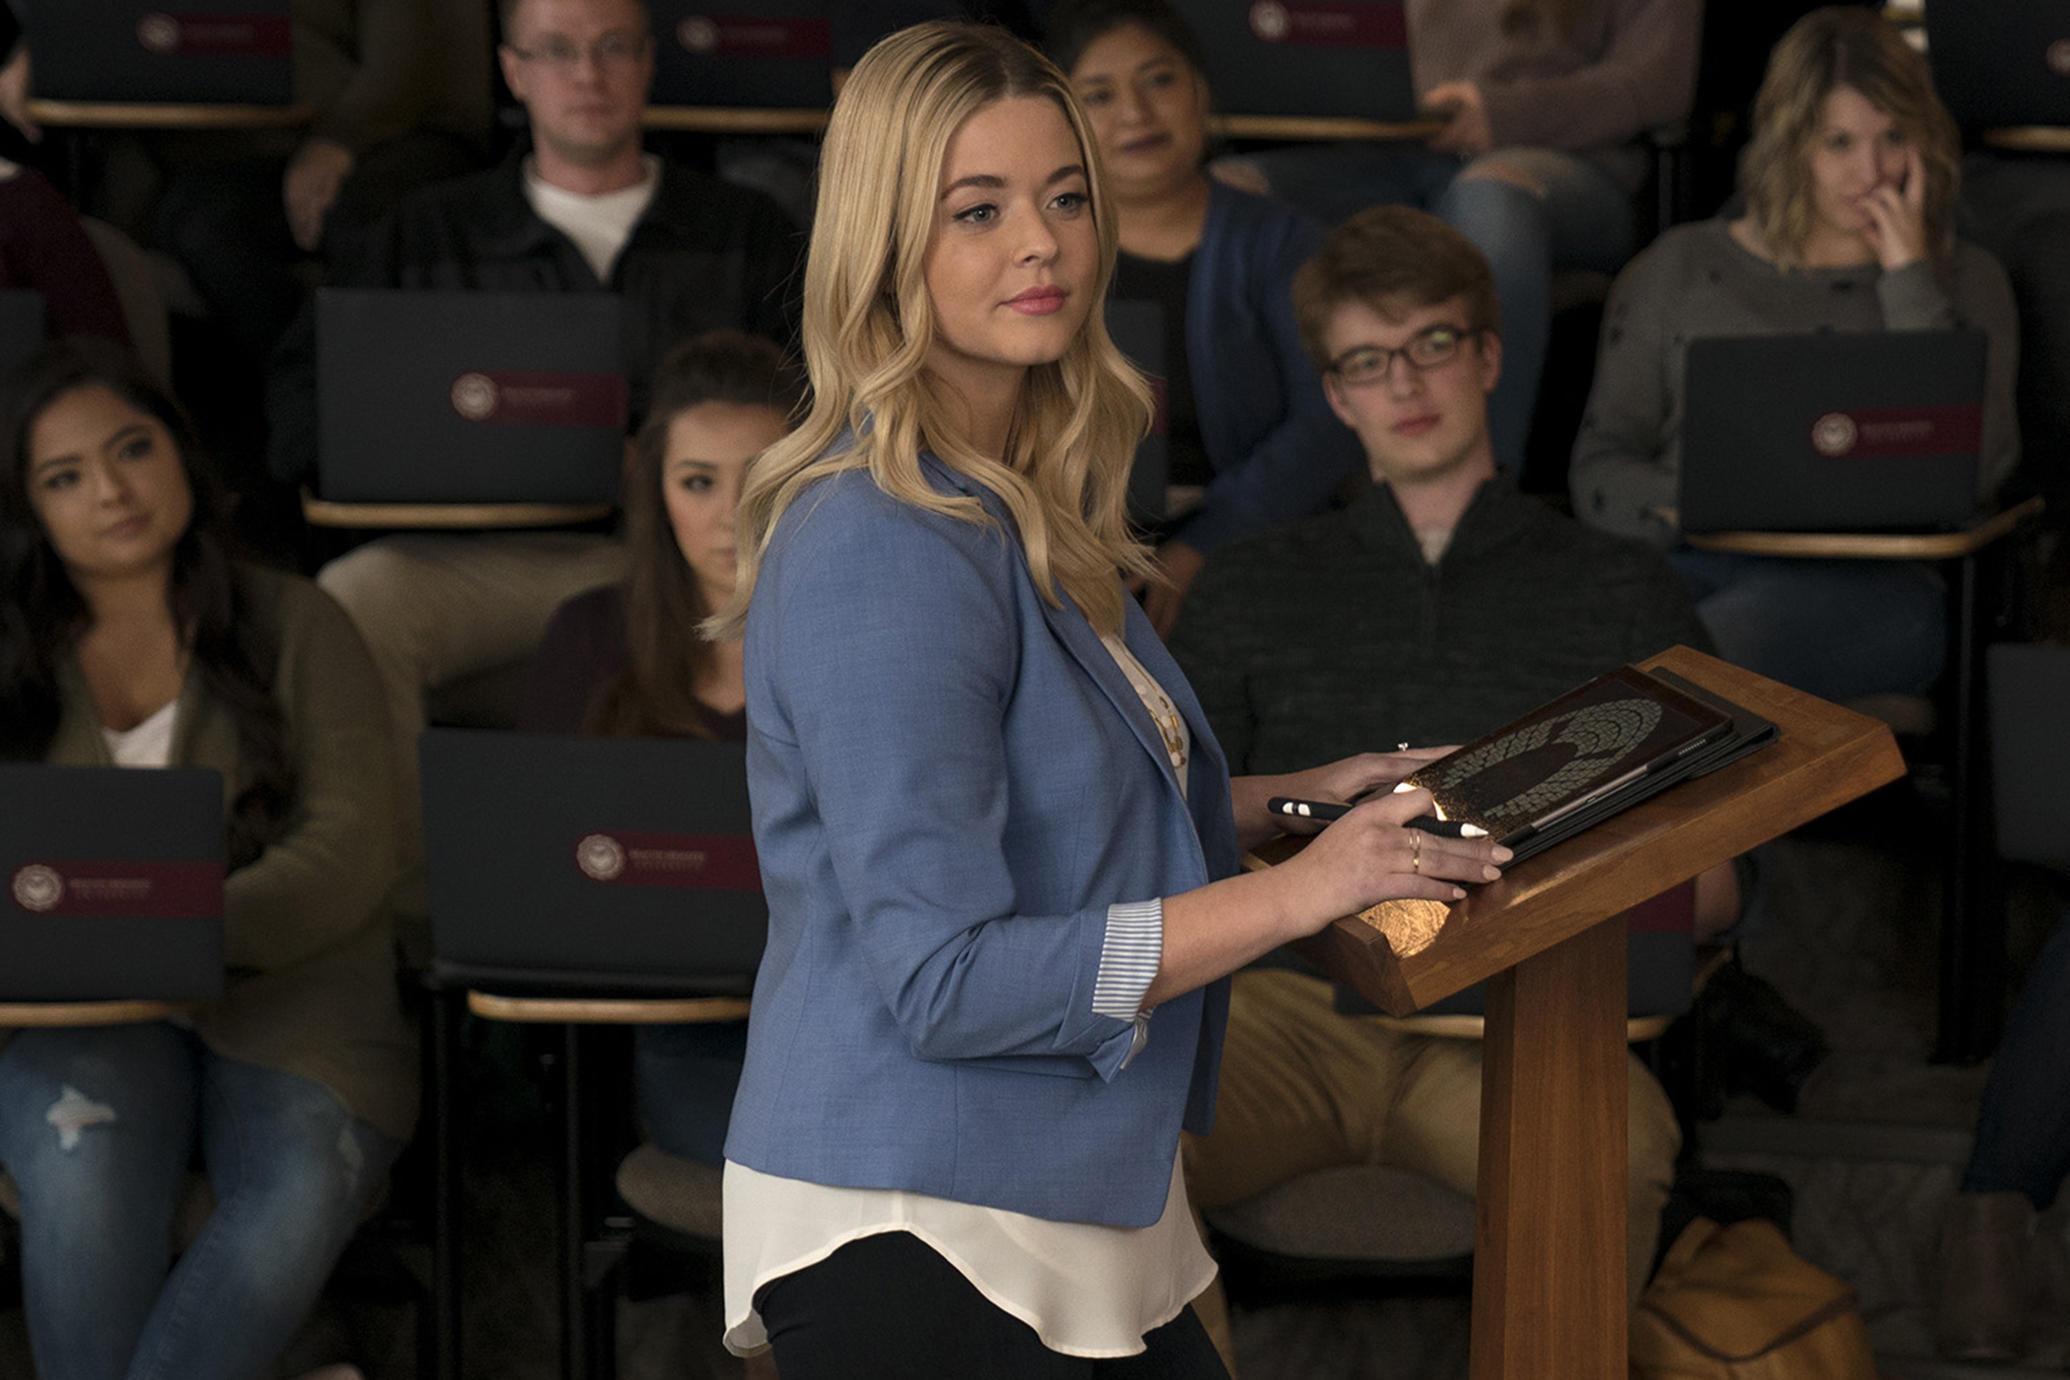 Pretty Little Liars: The Perfectionists Trailer: Will Alison Go Back